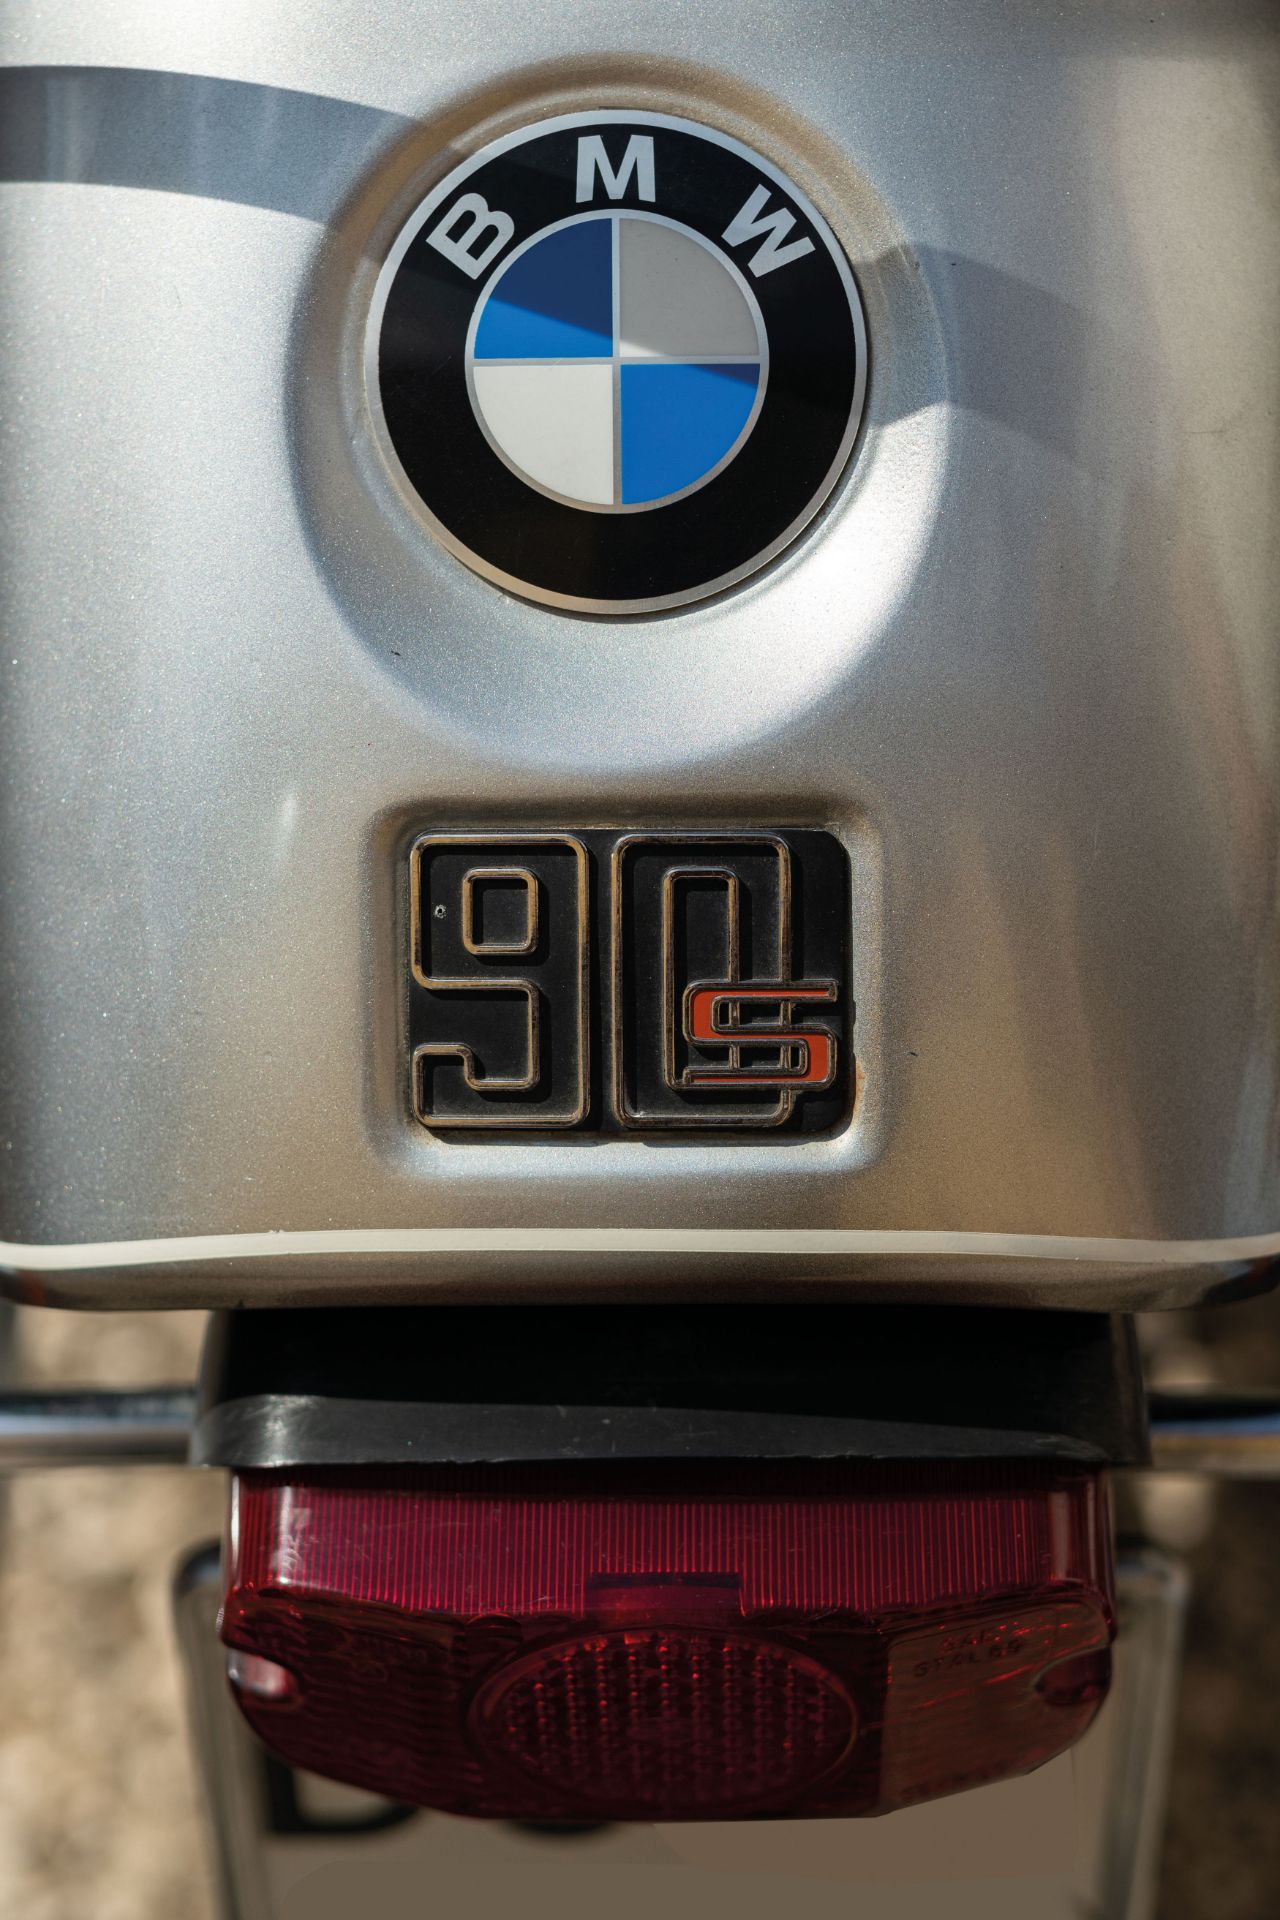 BMW R90 S, 1974 - Image 6 of 6